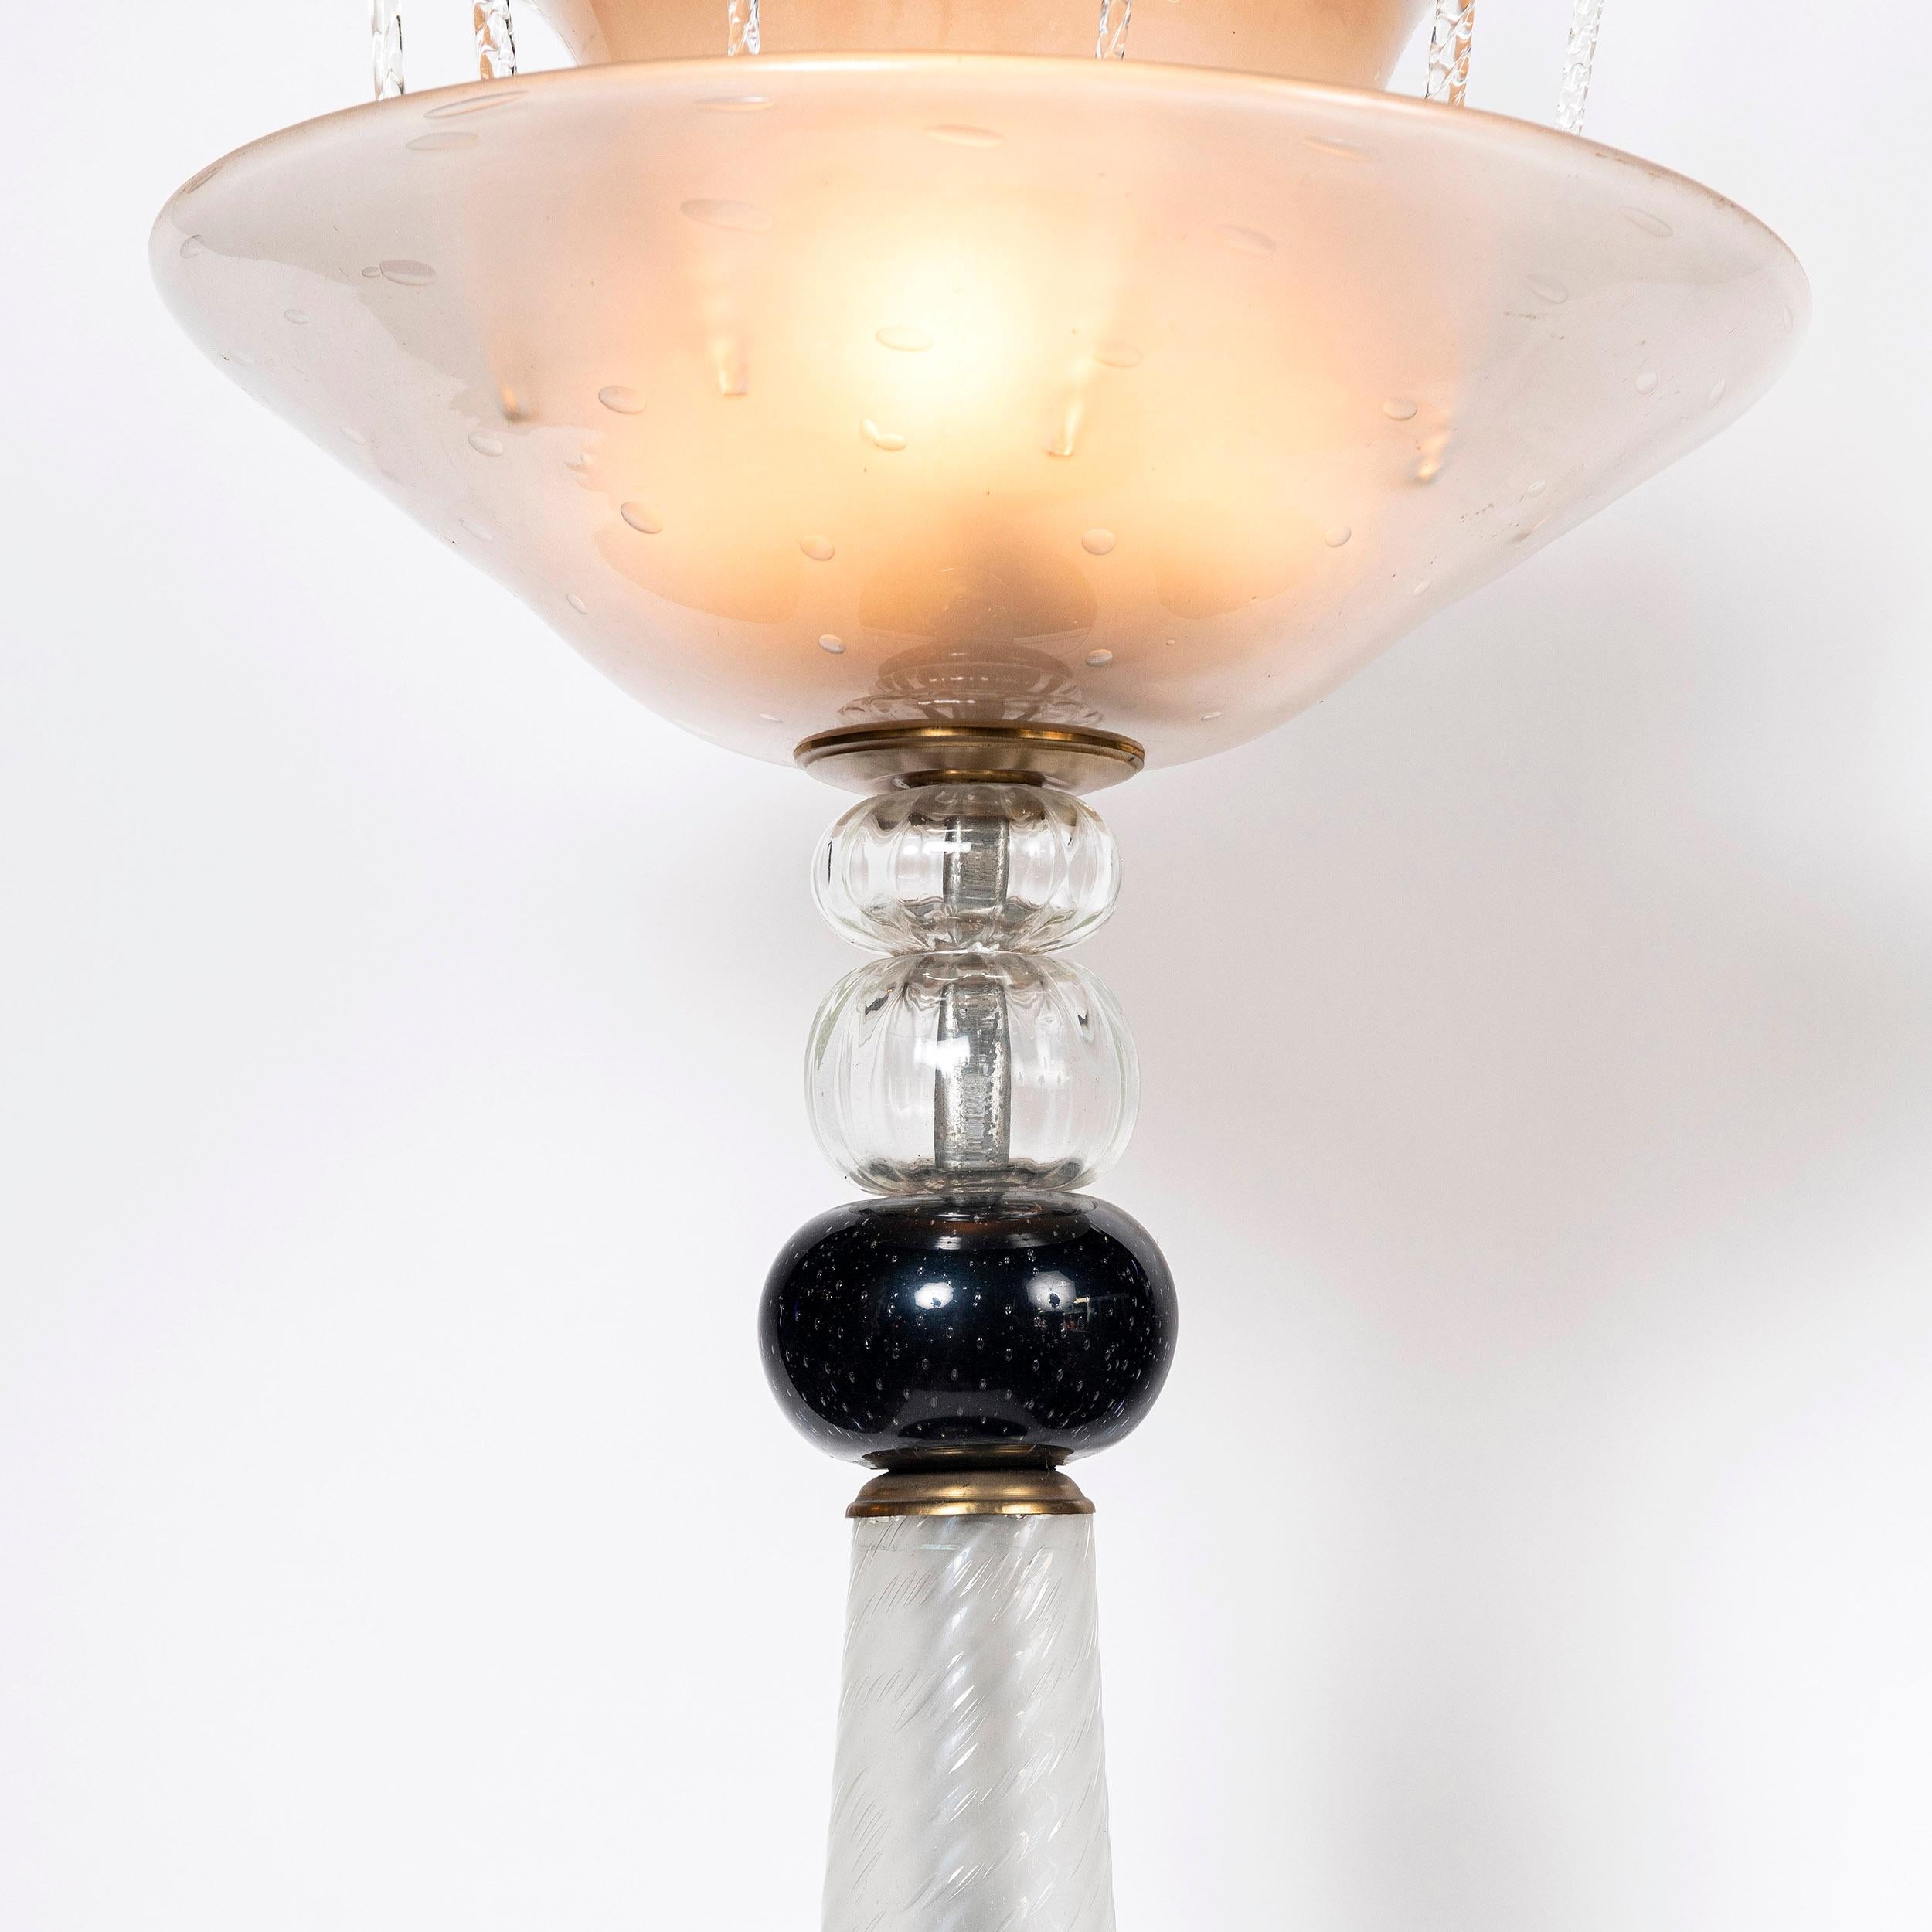 Mid-Century Modern Murano Glass Fountain Floor Lamp by Barovier & Toso, Italy, circa 1950 For Sale